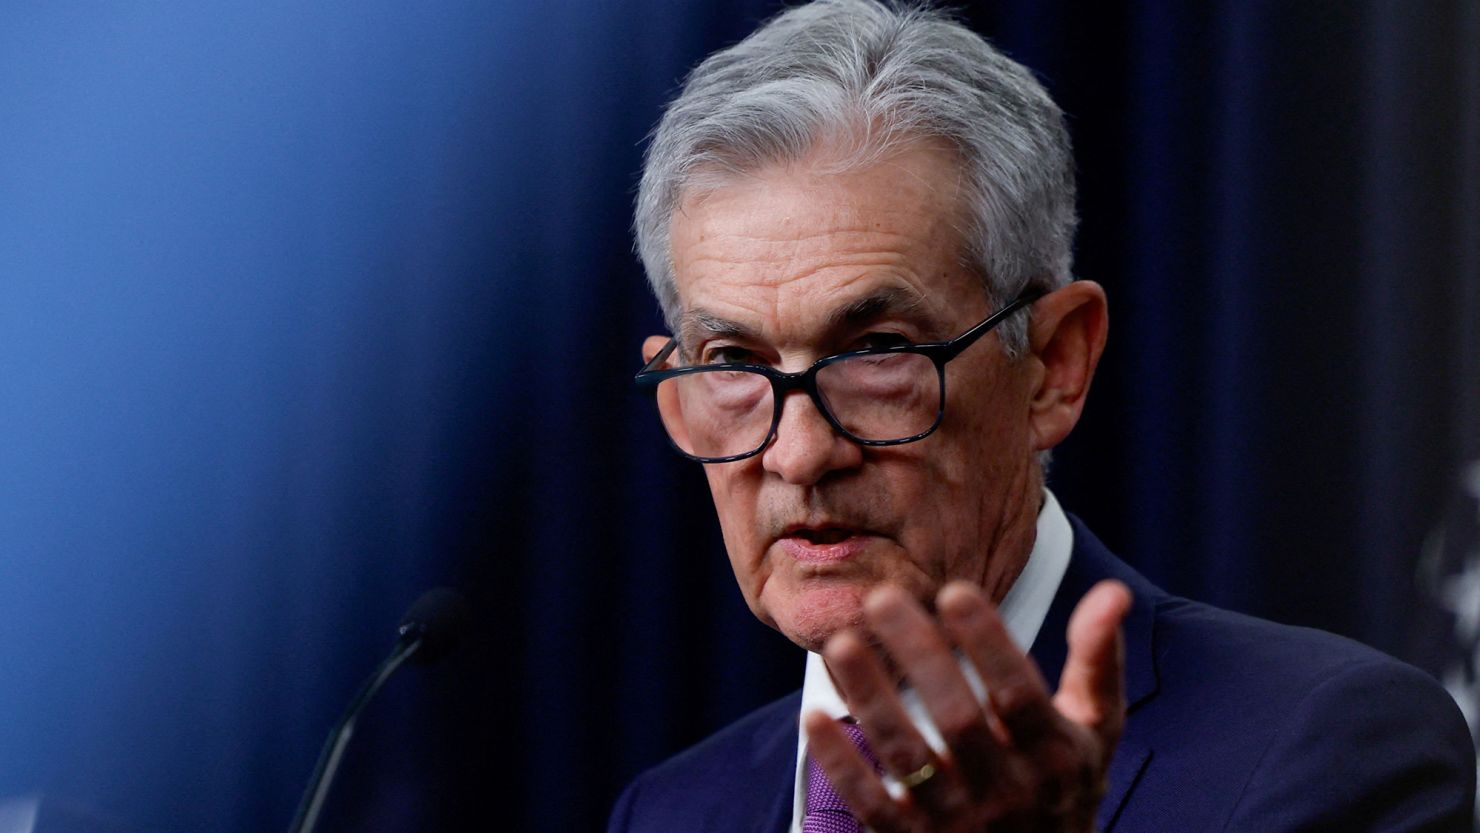 Federal Reserve Chair Jerome Powell holds a press conference following the release of the Fed's January interest rate policy decision at the Federal Reserve.